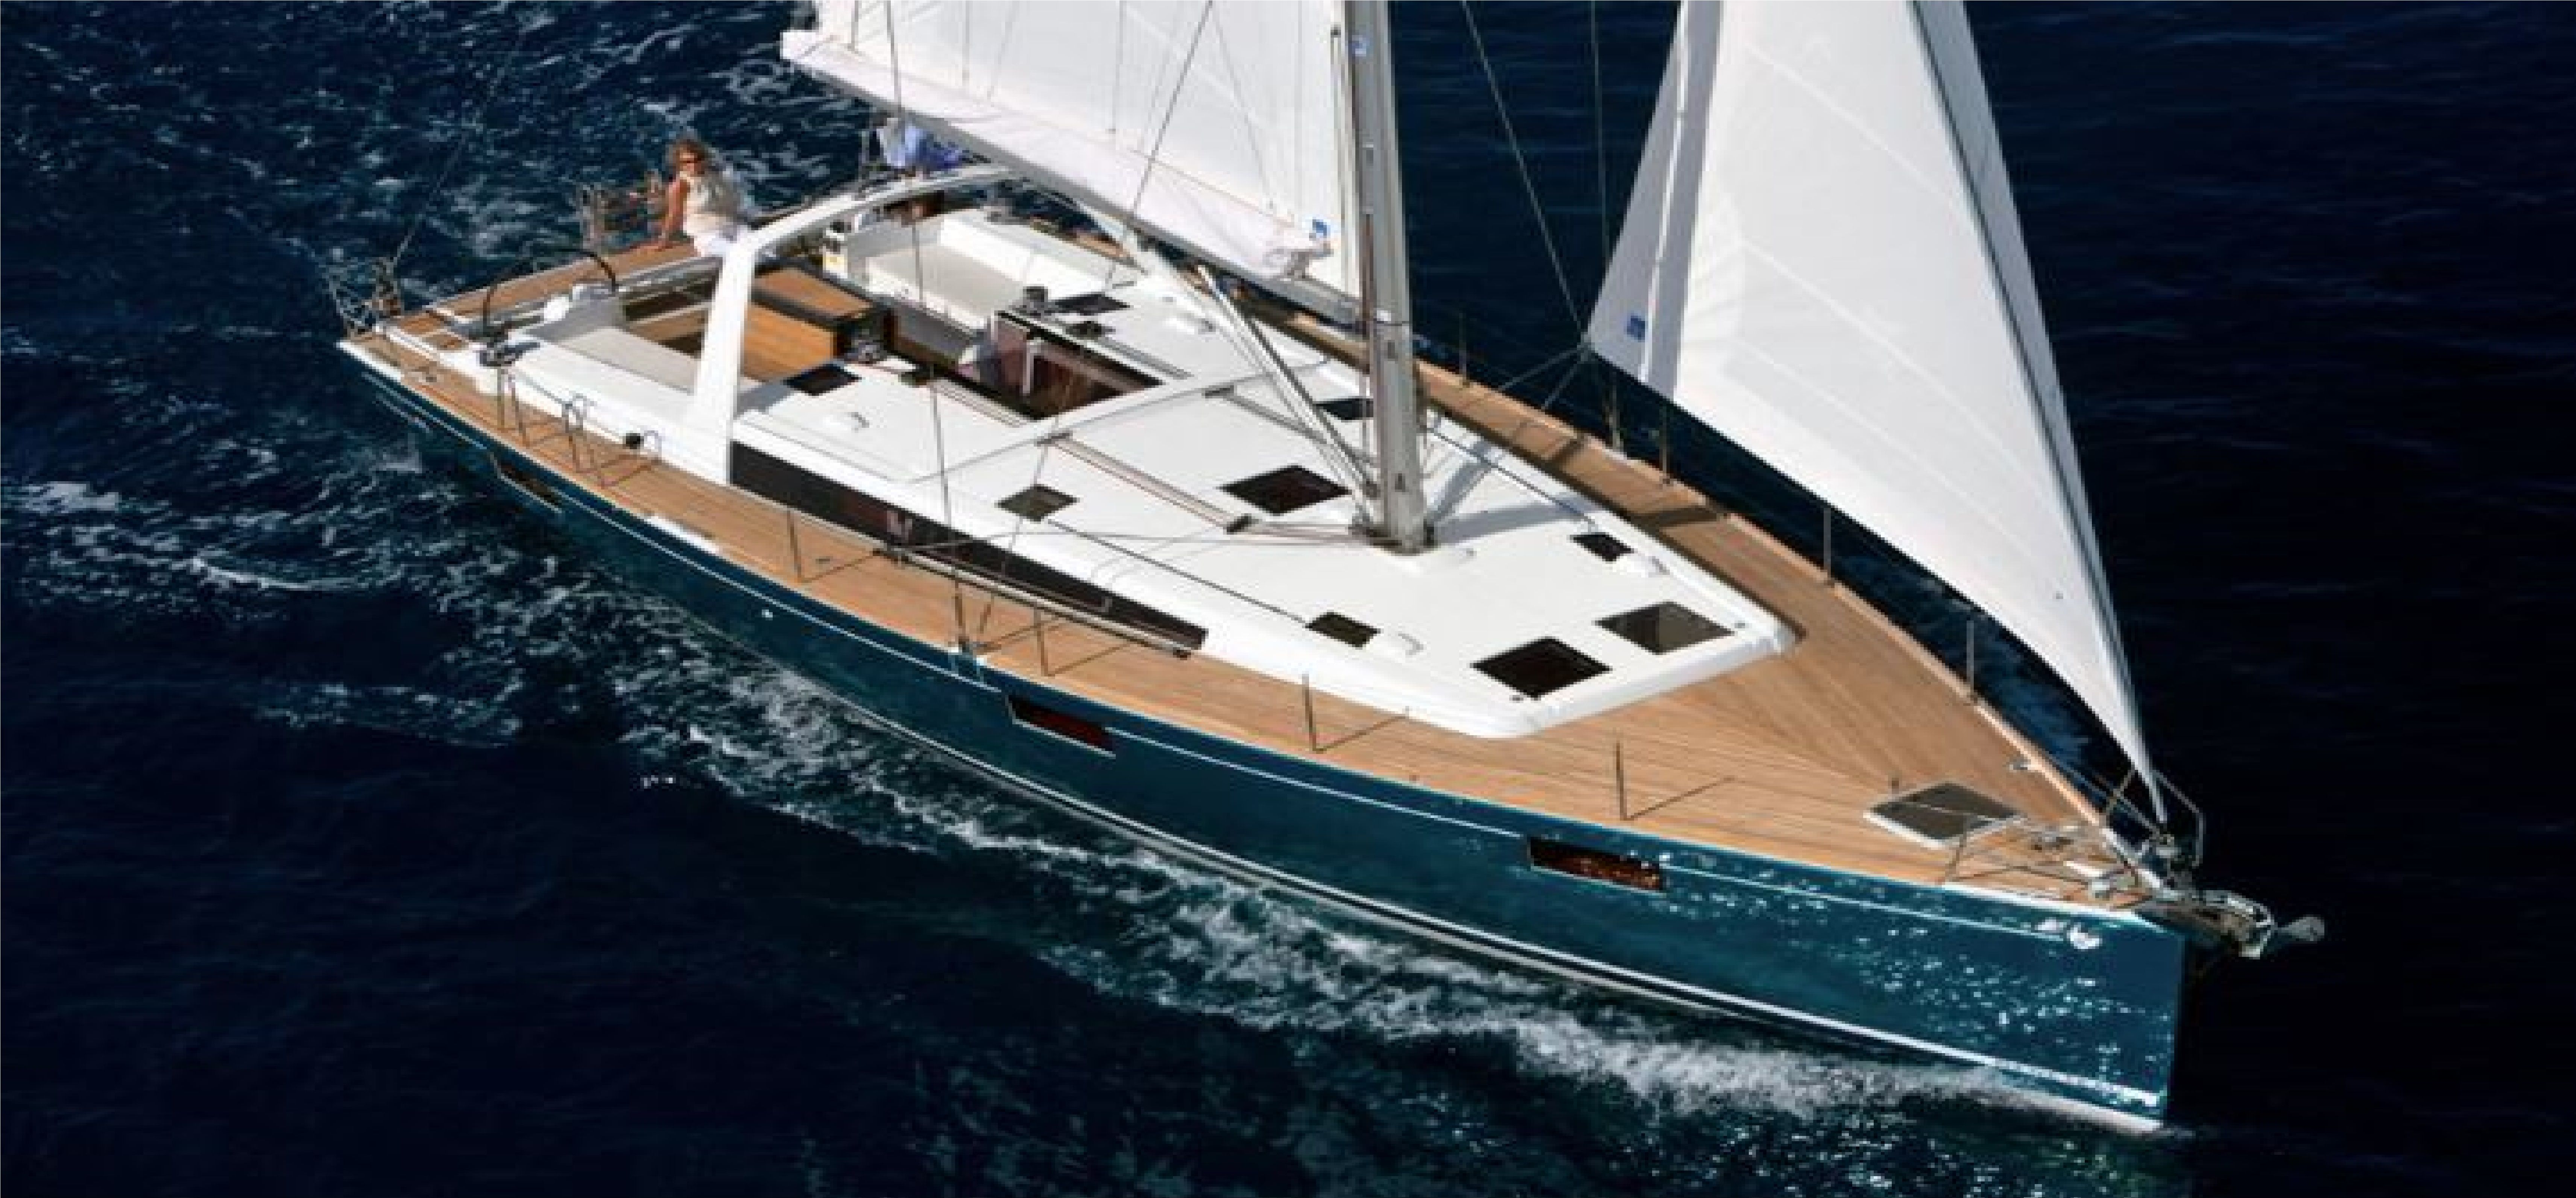 Oceanis 48 - 5Cab Nabucco: Aft cabin #2 (Cabin charter - 2 pax) Fully Crewed, ALL EXPENSES